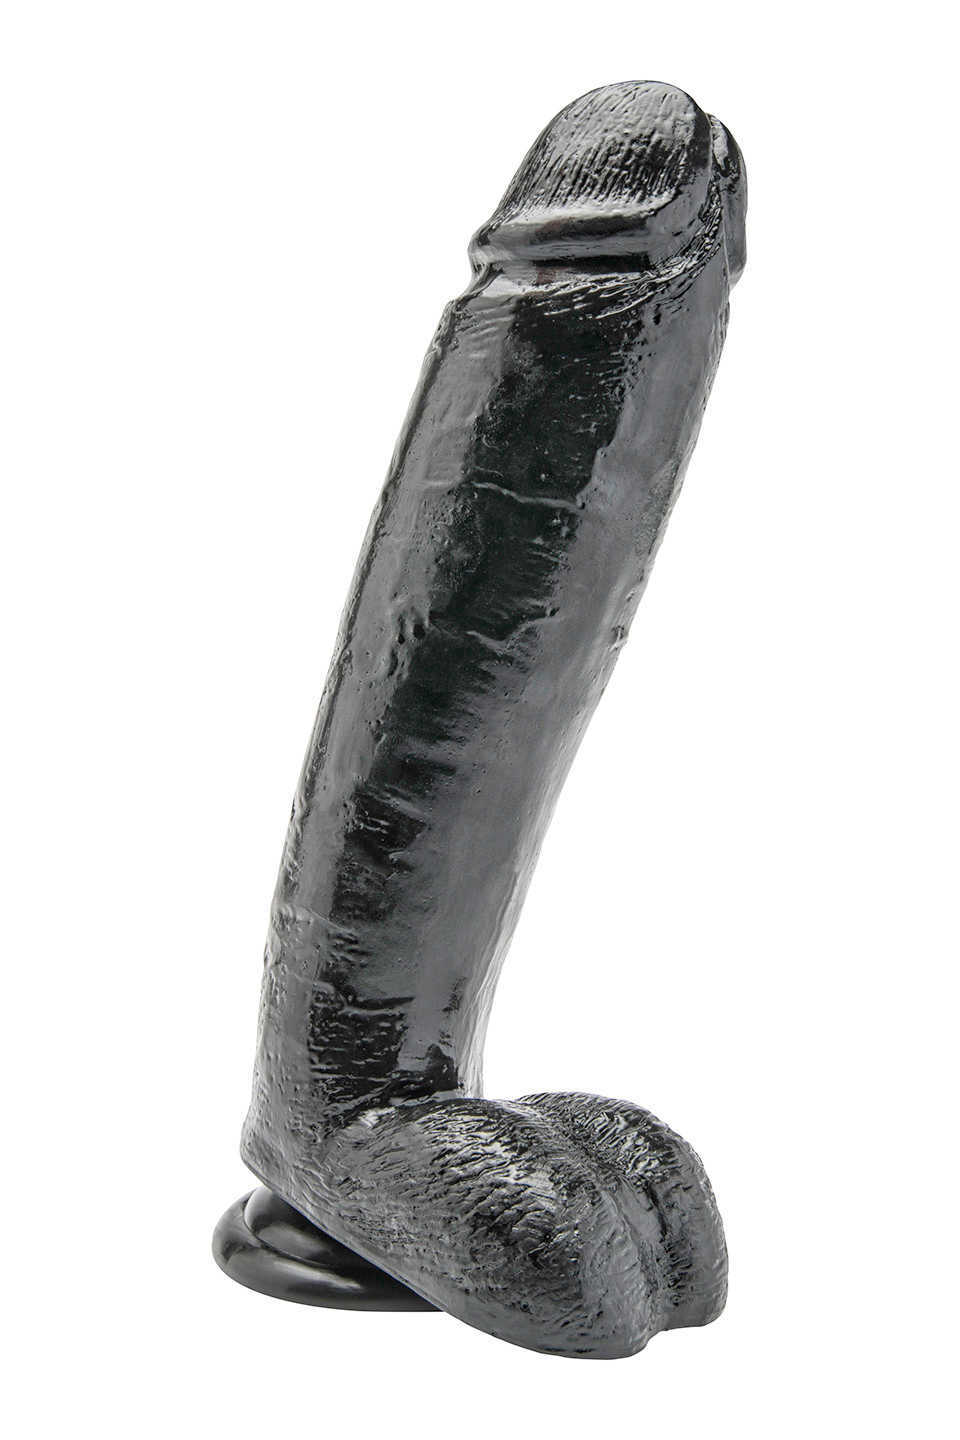 Get Real by TOYJOY Dildo 10 Inch